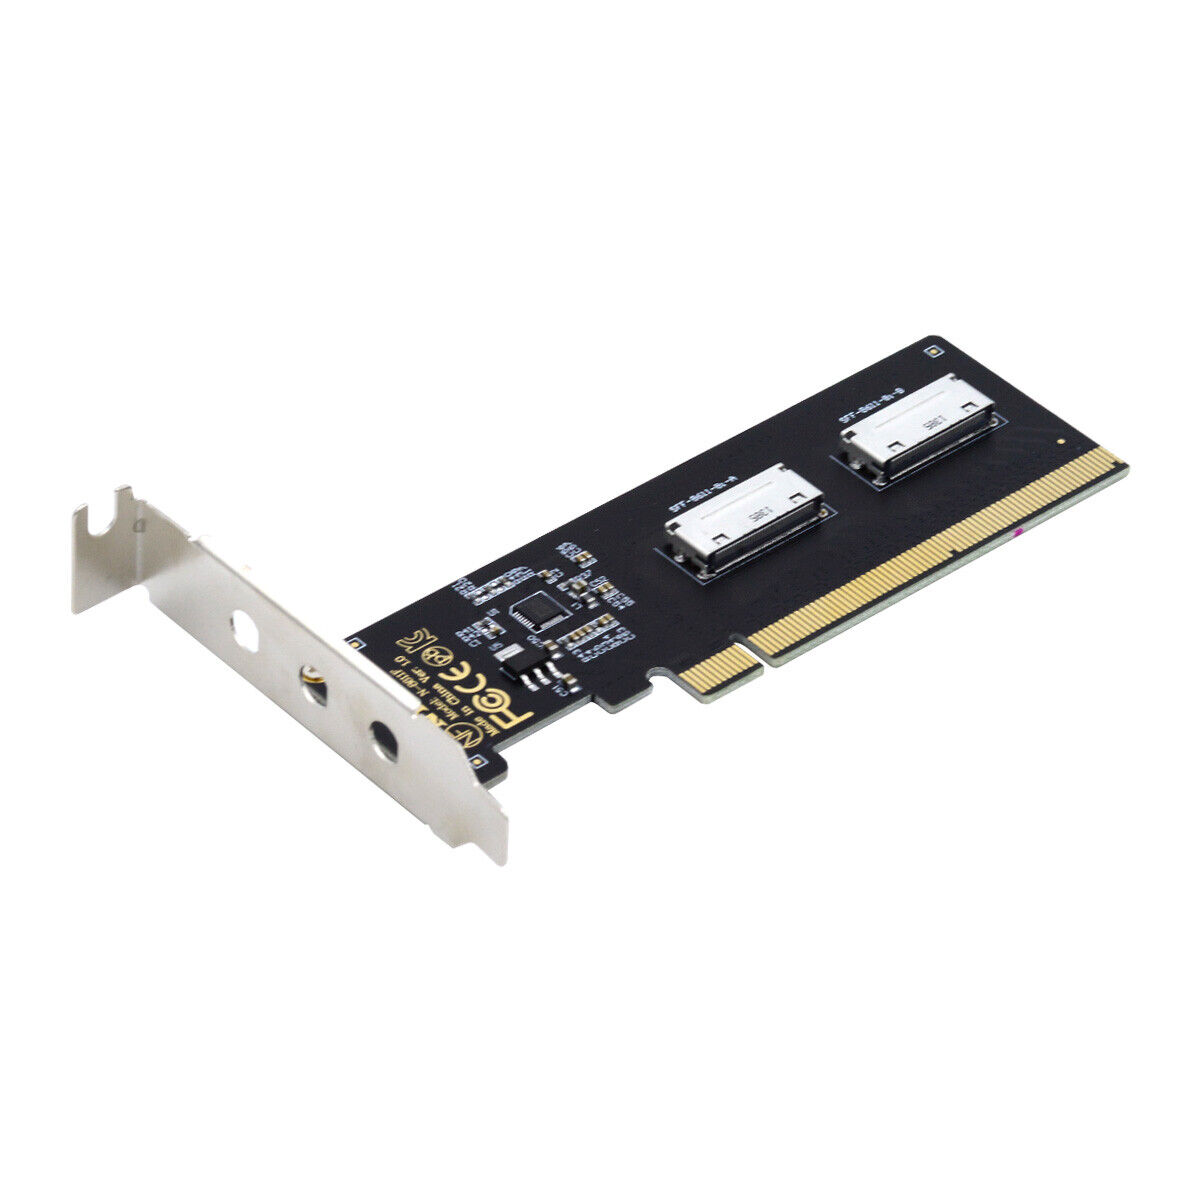 Chenyang PCIE PCI-Express 16x to Dual Oculink SFF-8612 SFF-8611 8x VROC Adapter